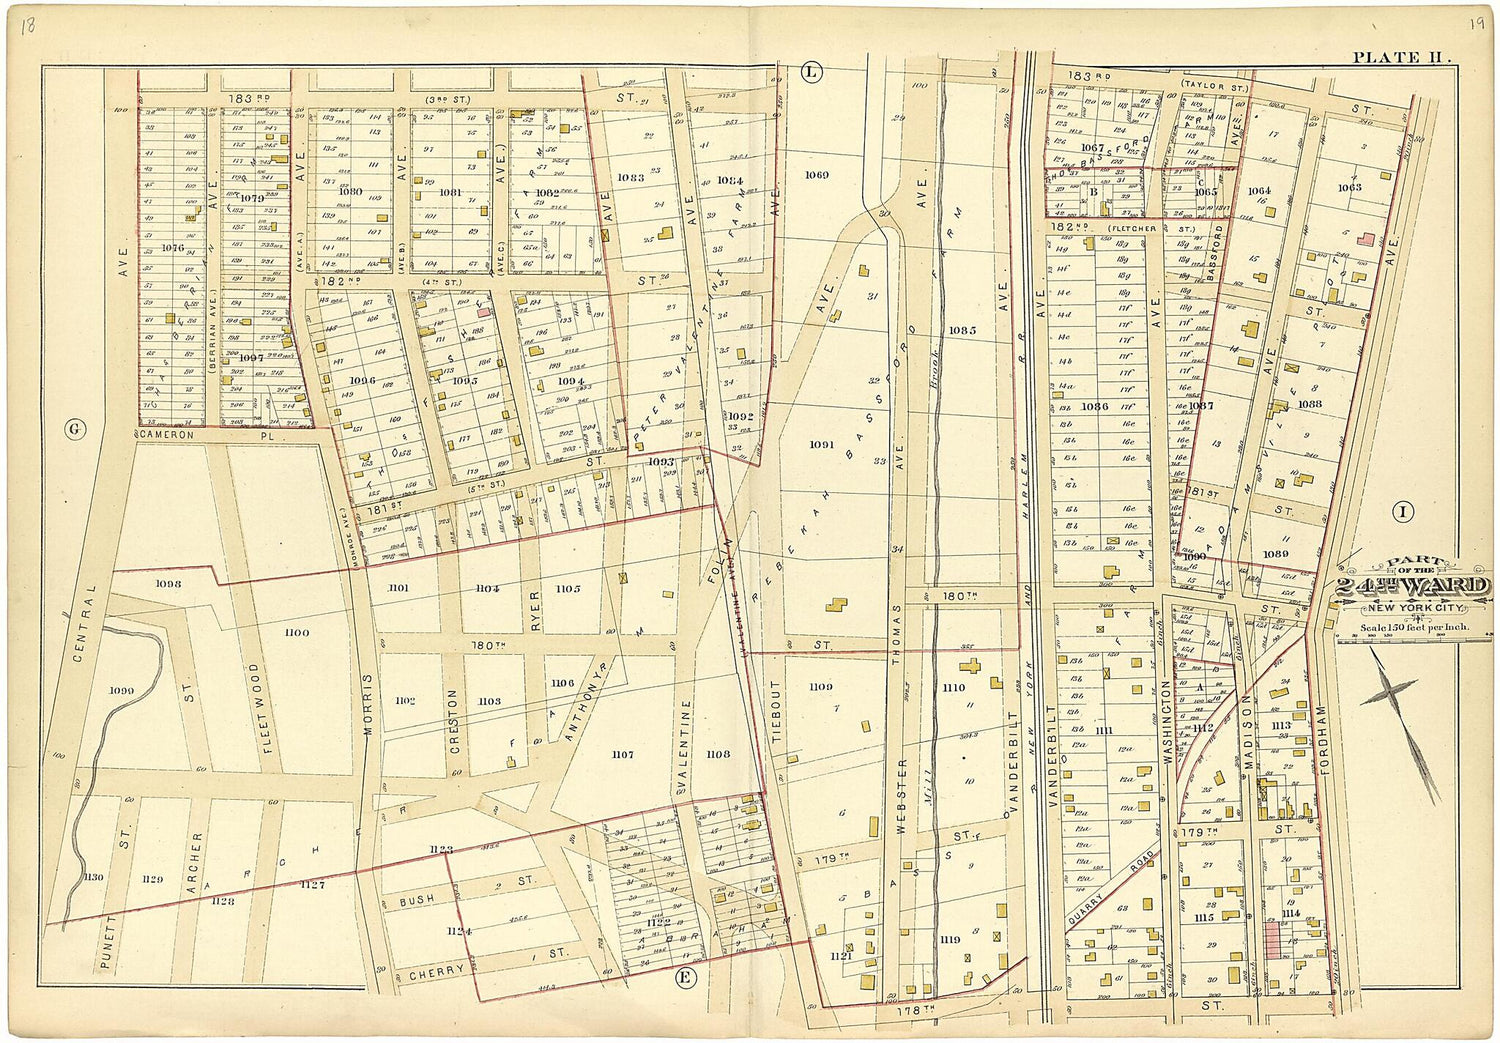 This old map of Part of the 24th Ward New York City - Plate H from Atlas of the Twenty Fourth Ward, New York City from 1882 was created by A. H. (August H.) Mueller in 1882